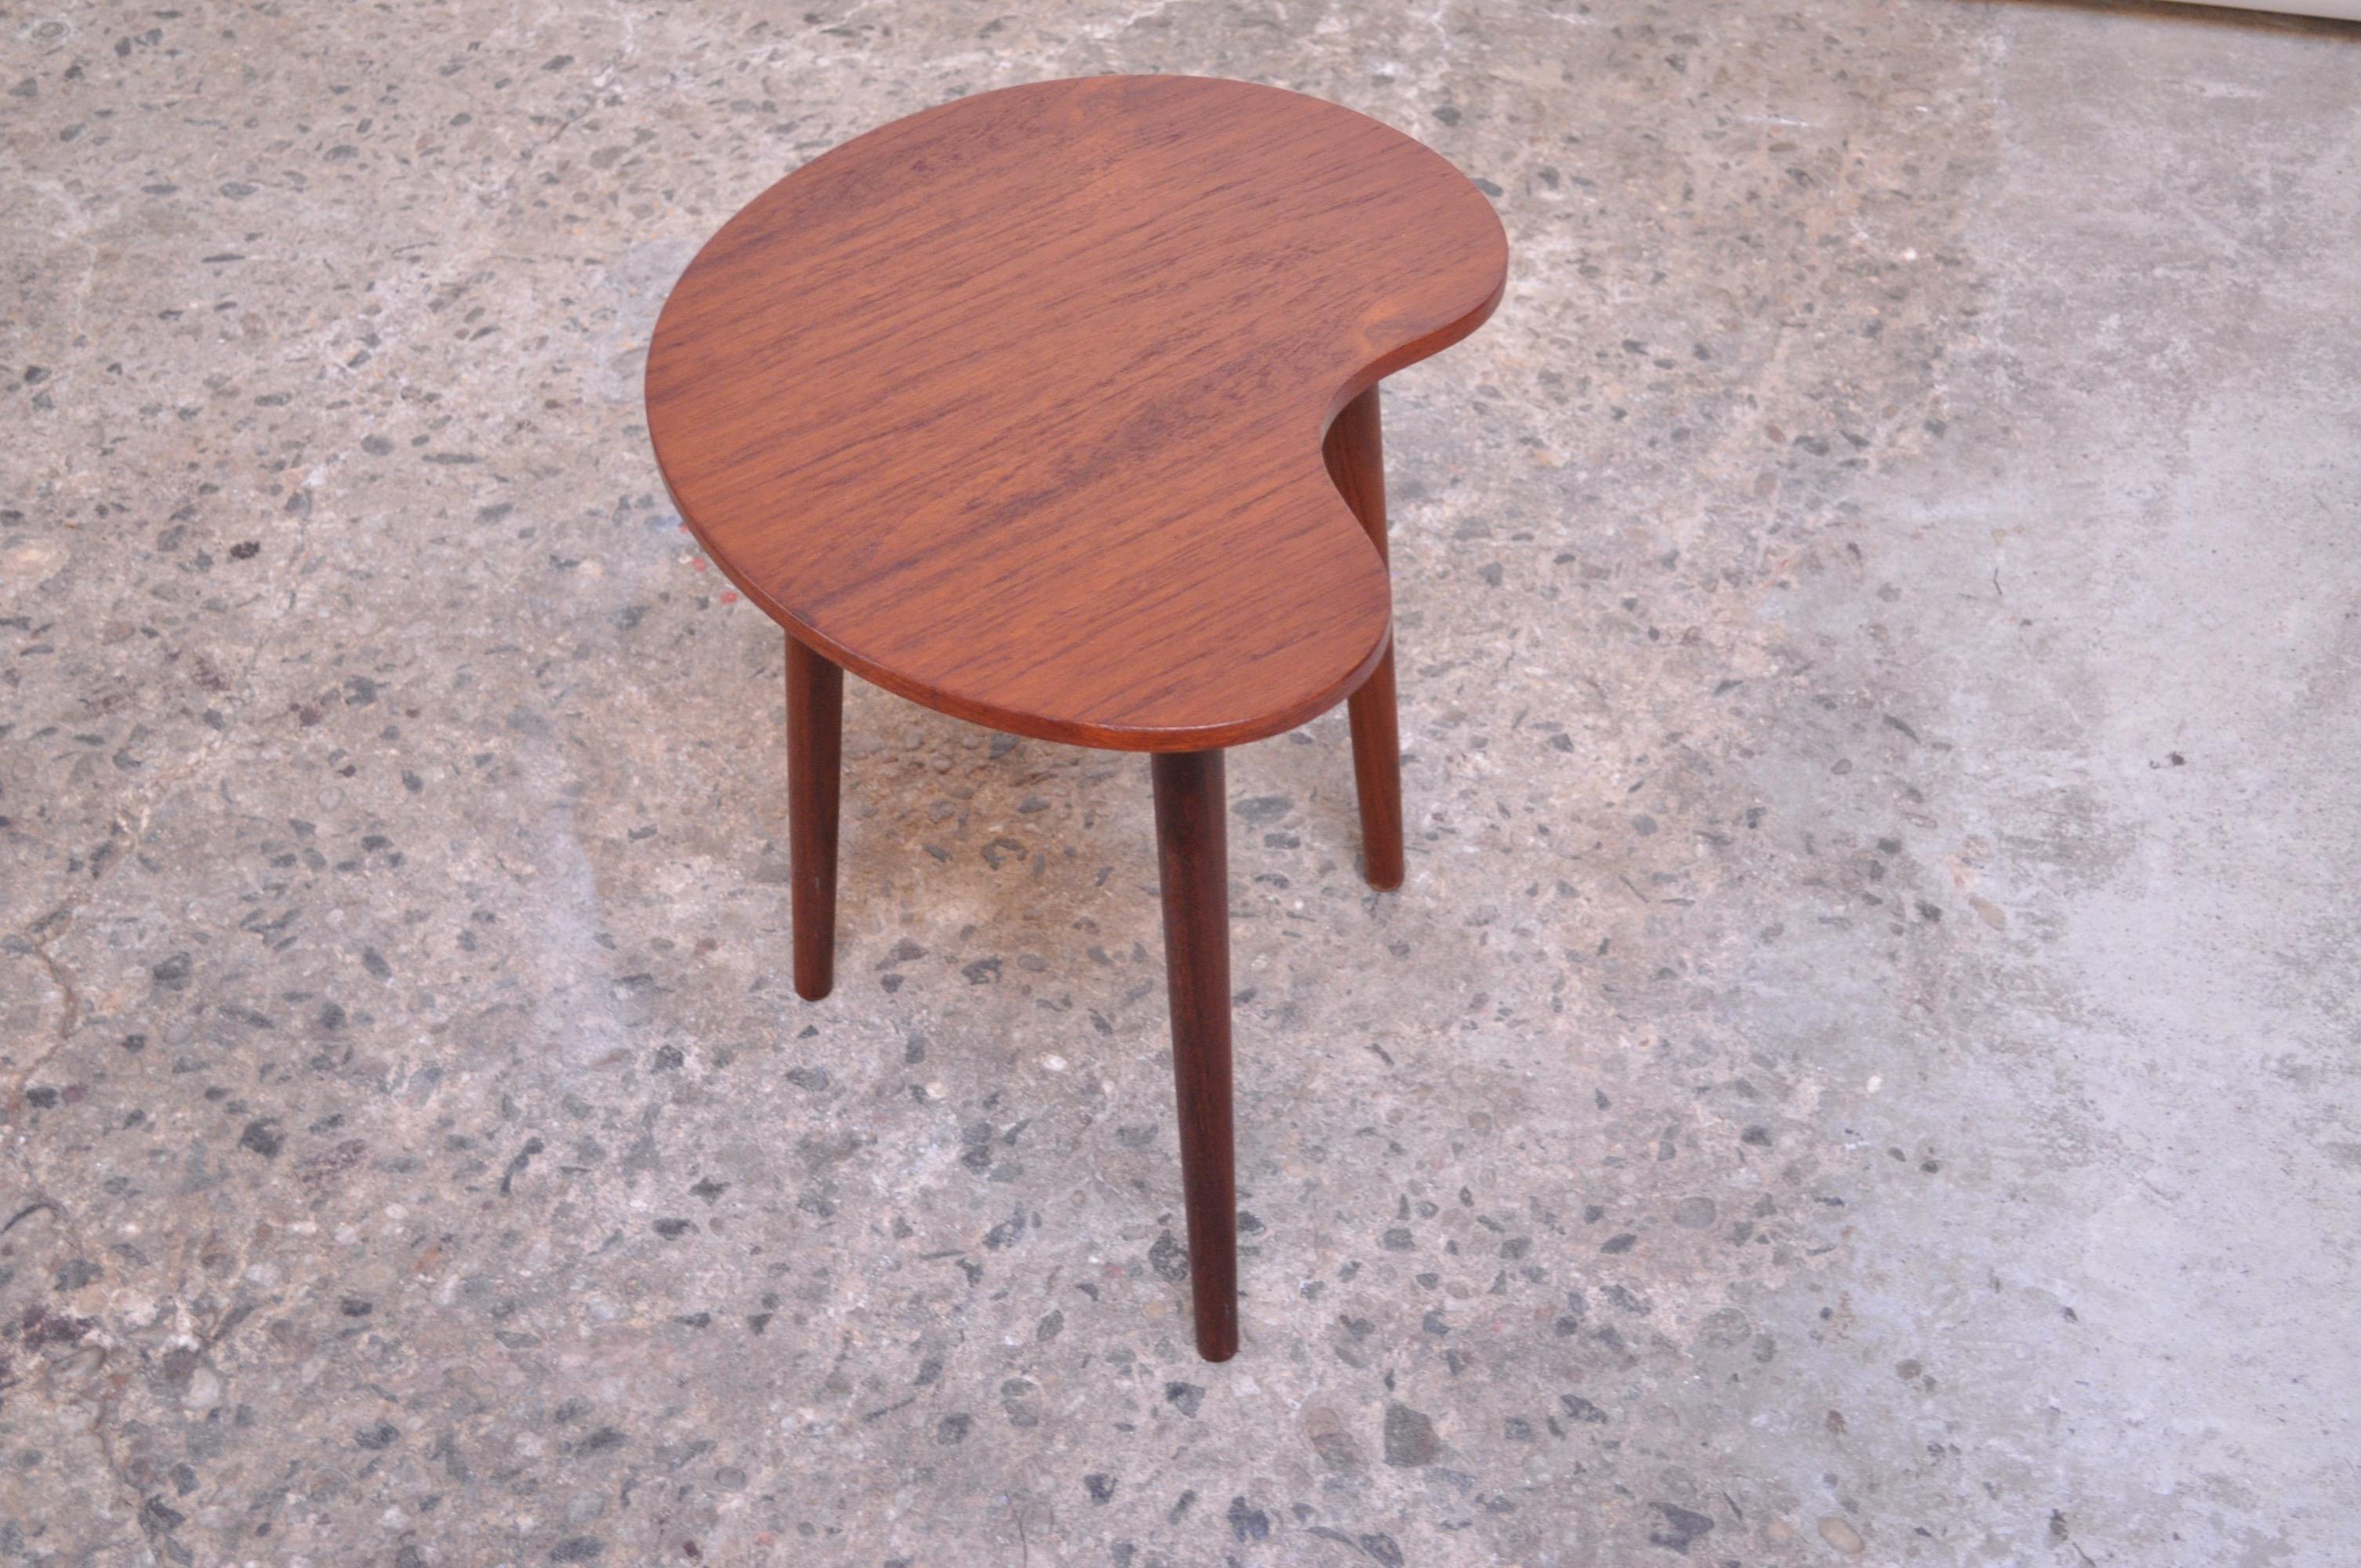 Teak side table by Gorm-Møbler of Denmark, circa 1955. Features a 'kidney' / organic form top supported by three sculptural, tapered legs. Newly refinished condition; only light wear remains. 

Measures: H 17.1